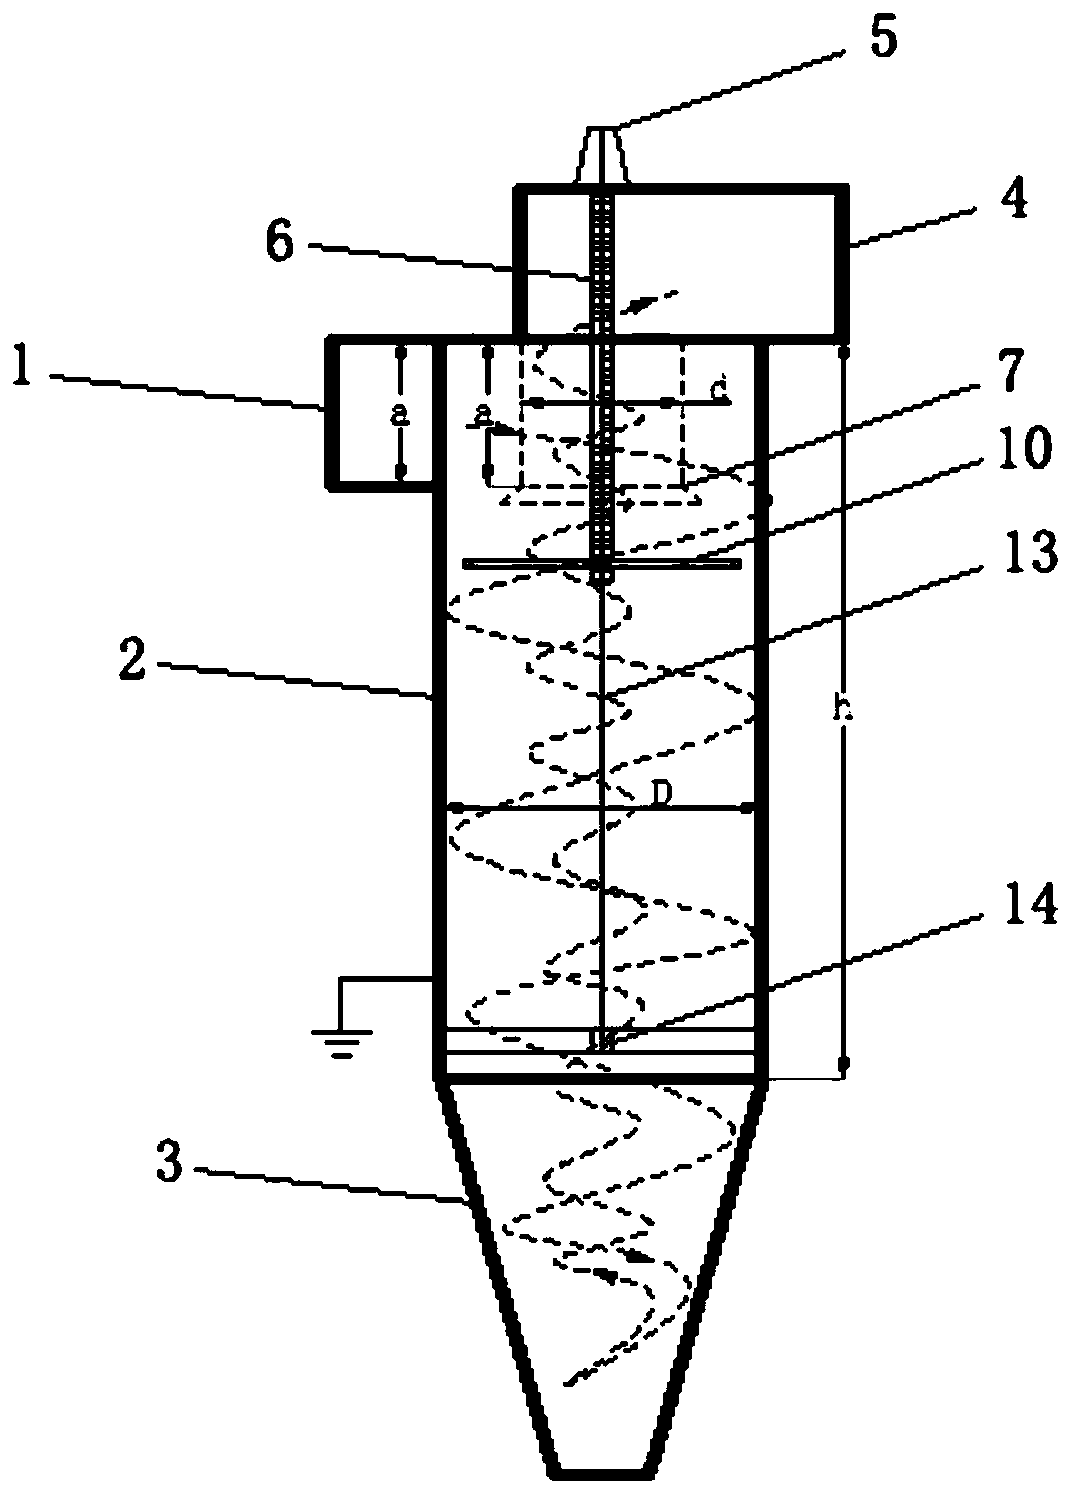 Cyclone-electrostatic-coupled wet dust removal device